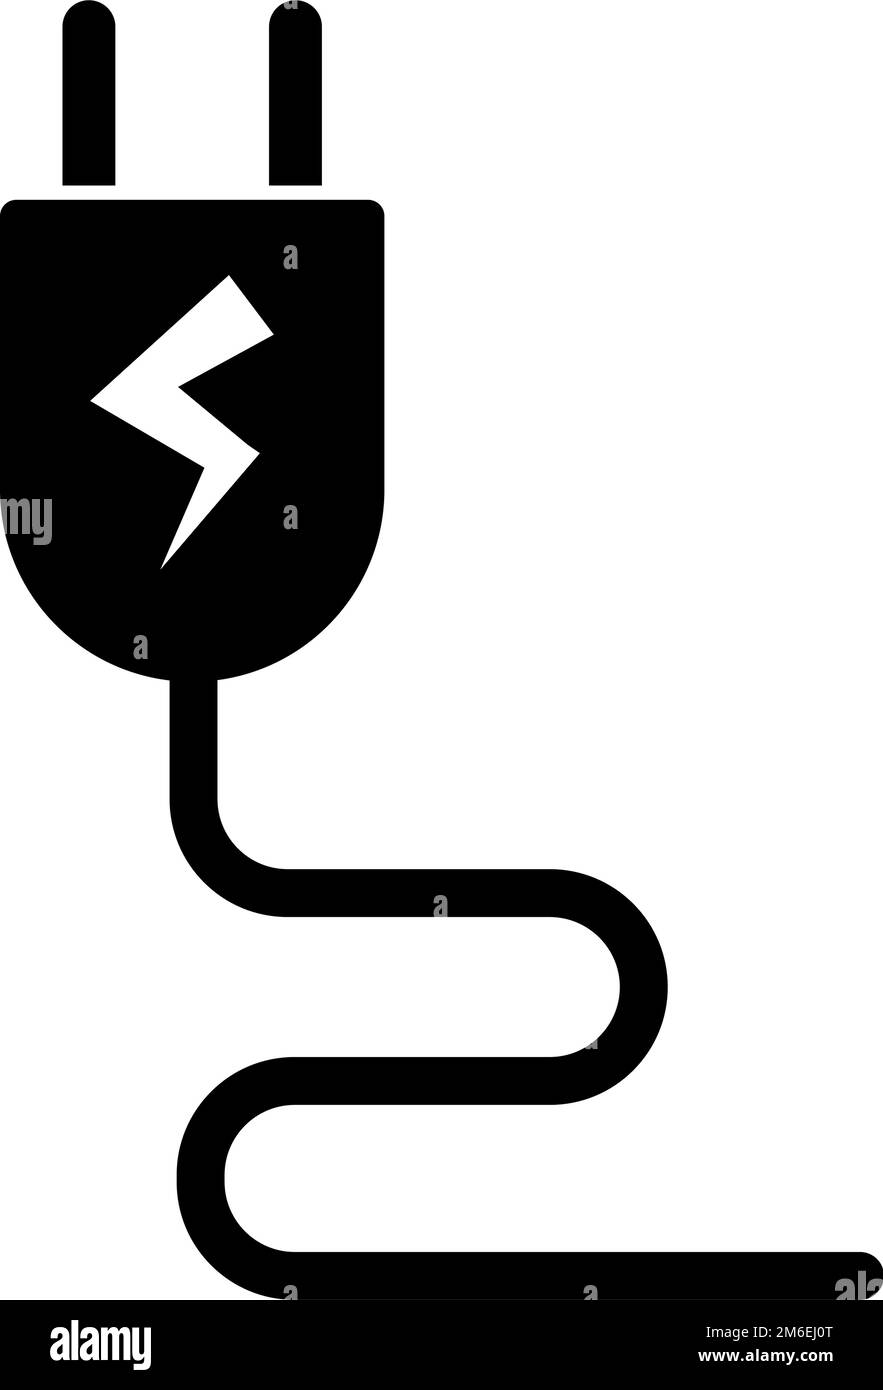 Charging socket plug silhouette icon. Outlet plug being supplied with power. Editable vector. Stock Vector